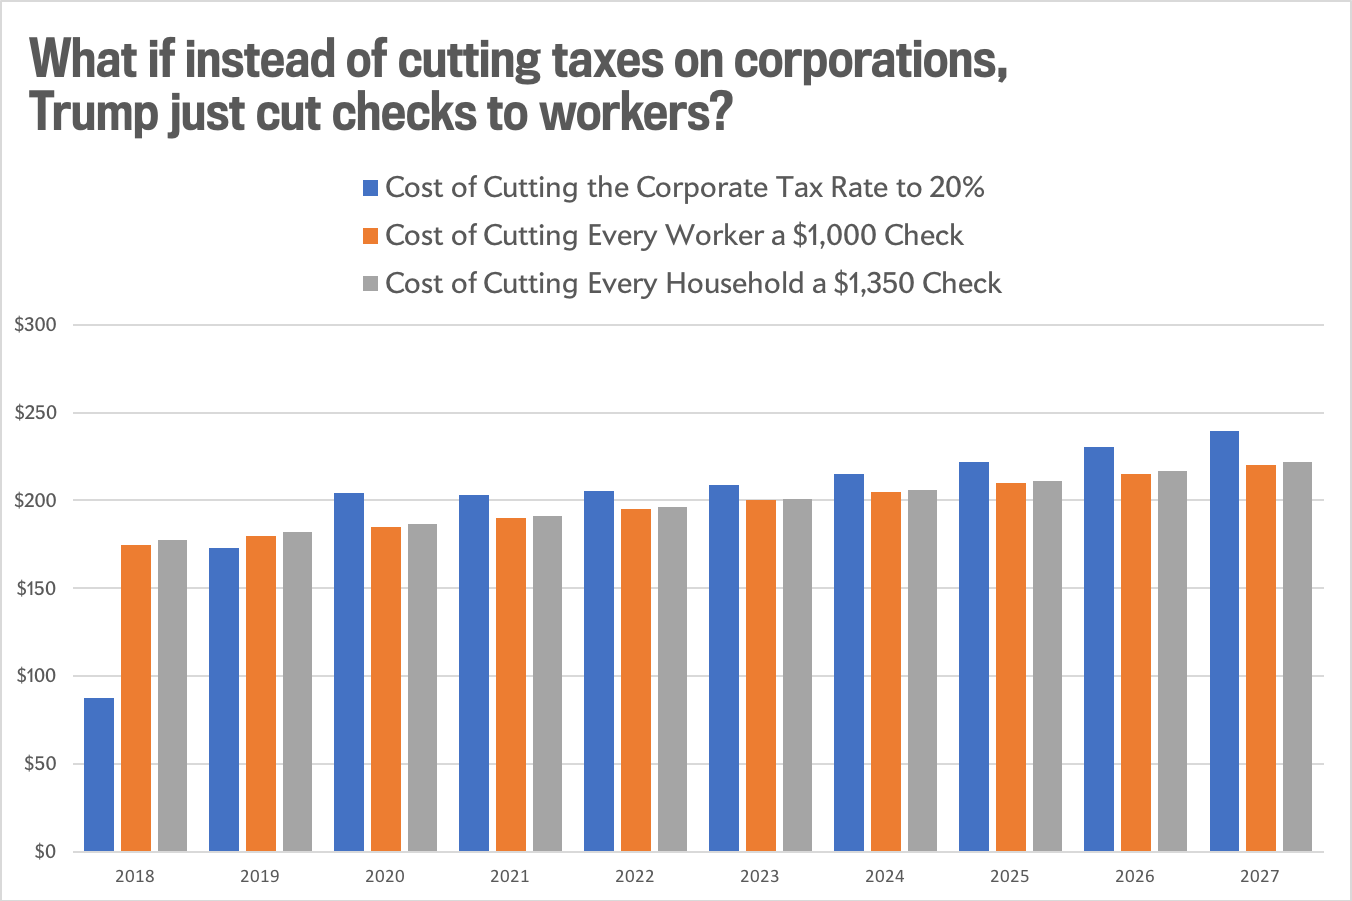 What if instead of cutting corporate taxes, Trump cut checks to families?